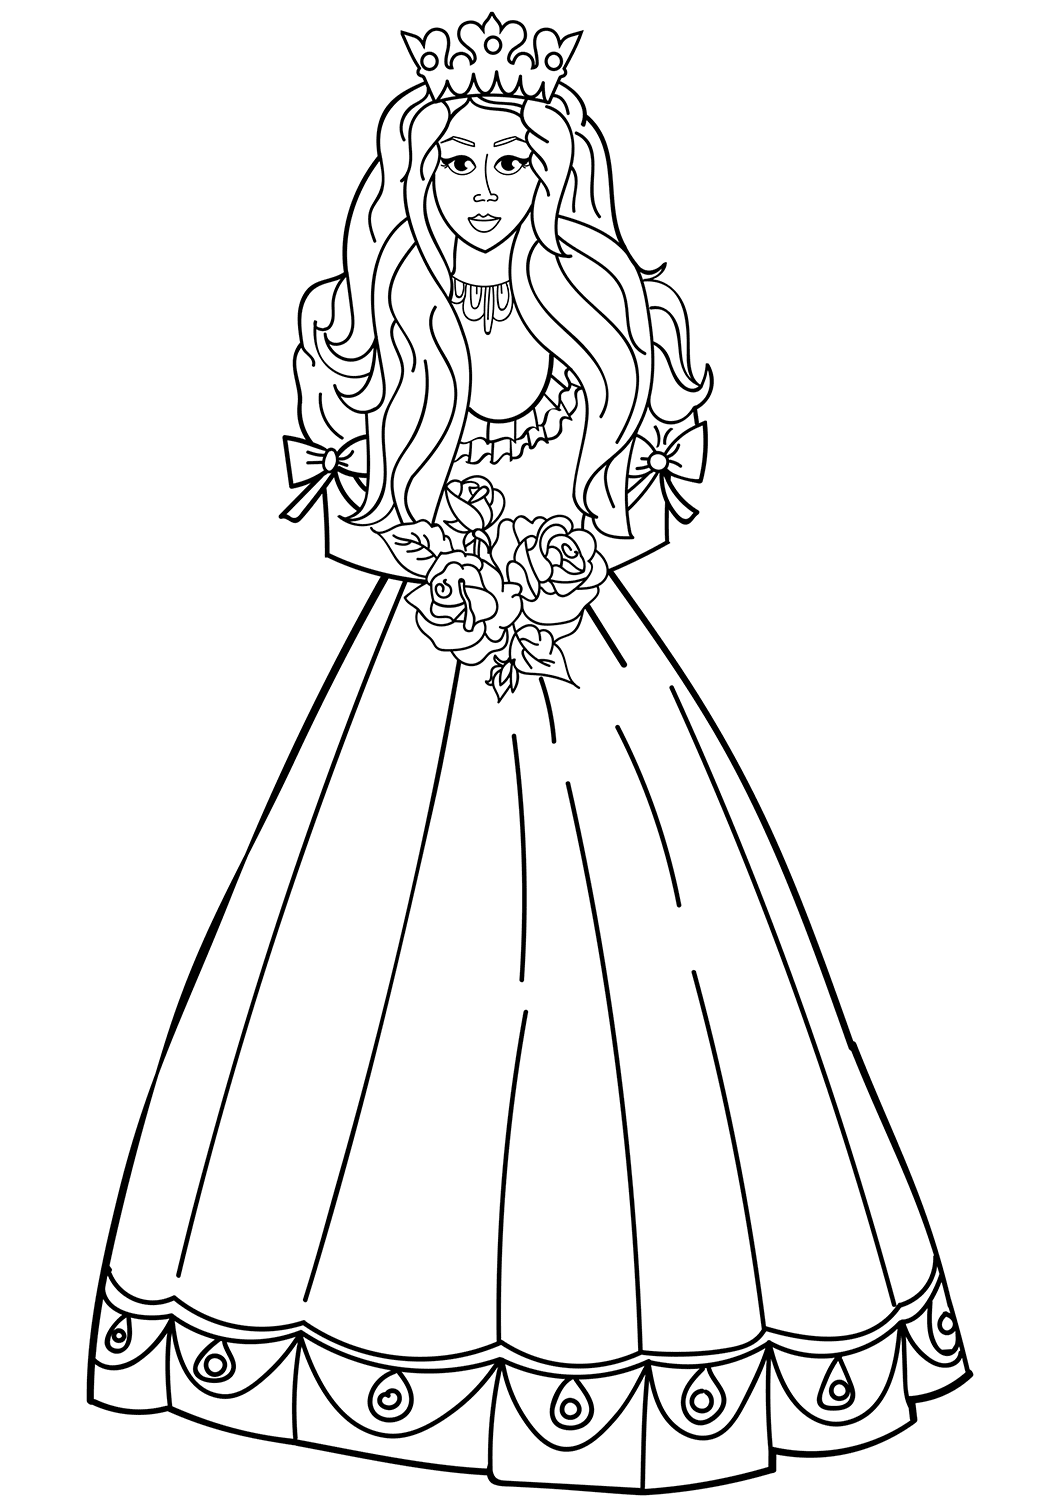 Princess With Roses Bouquet Coloring Page